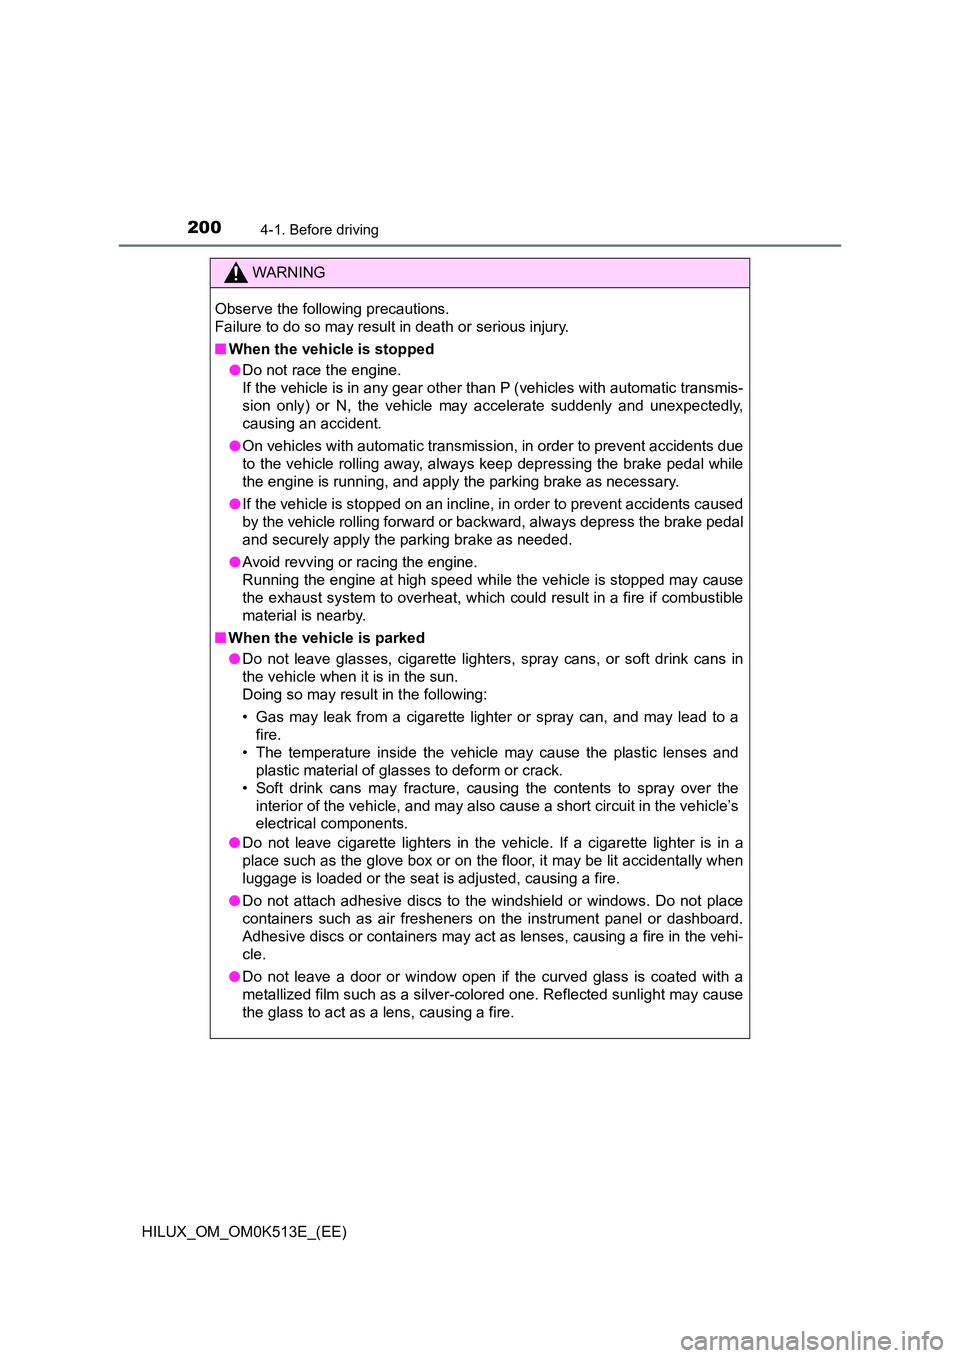 TOYOTA HILUX 2021  Owners Manual (in English) 2004-1. Before driving
HILUX_OM_OM0K513E_(EE)
WARNING
Observe the following precautions. 
Failure to do so may result in death or serious injury. 
�Q When the vehicle is stopped 
�O Do not race the en